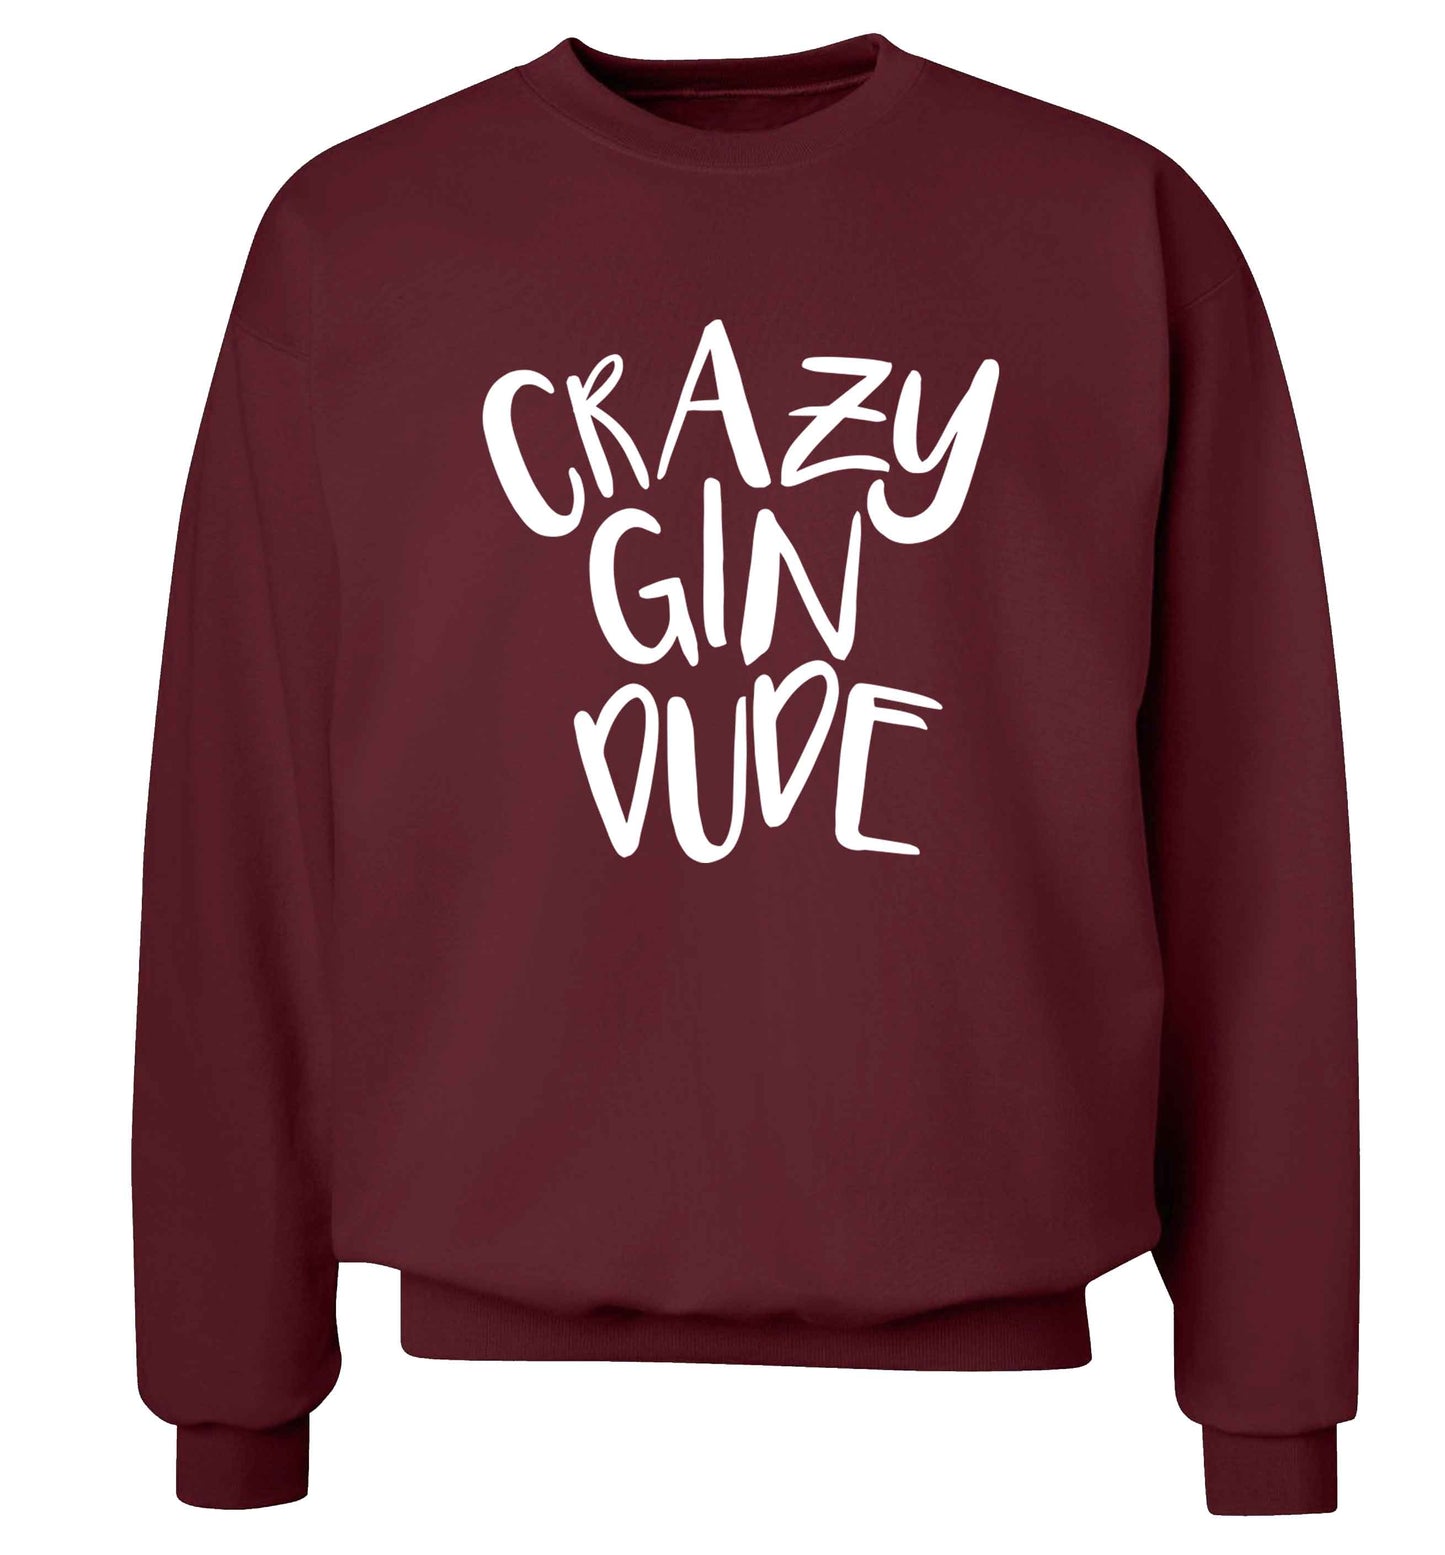 Crazy gin dude Adult's unisex maroon Sweater 2XL